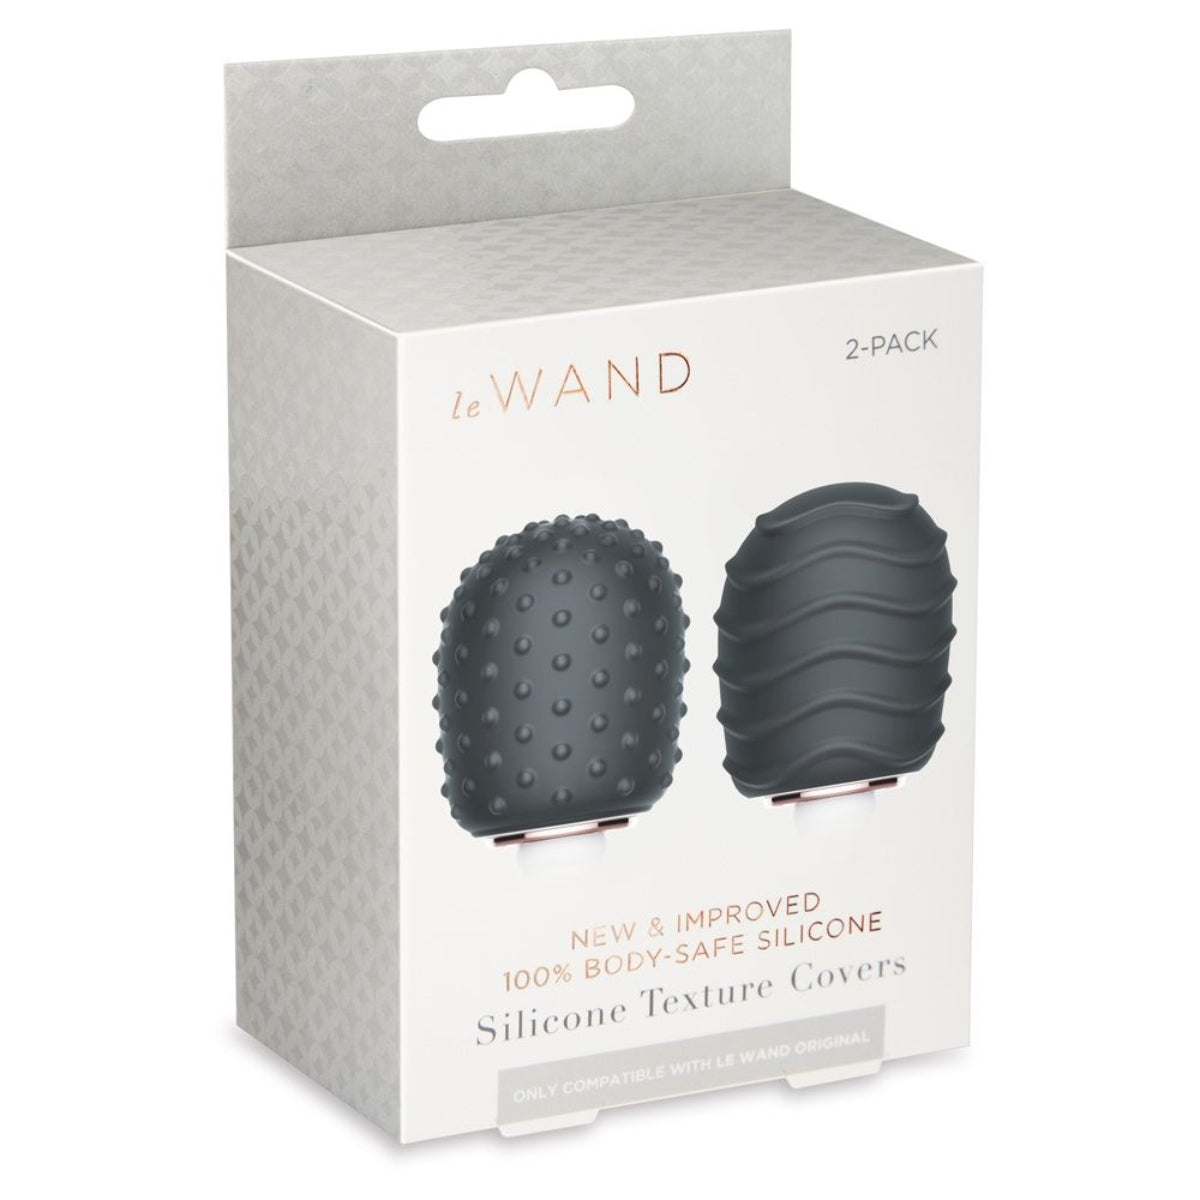 Le Wand Silicone Texture Covers 2 Pack Grey